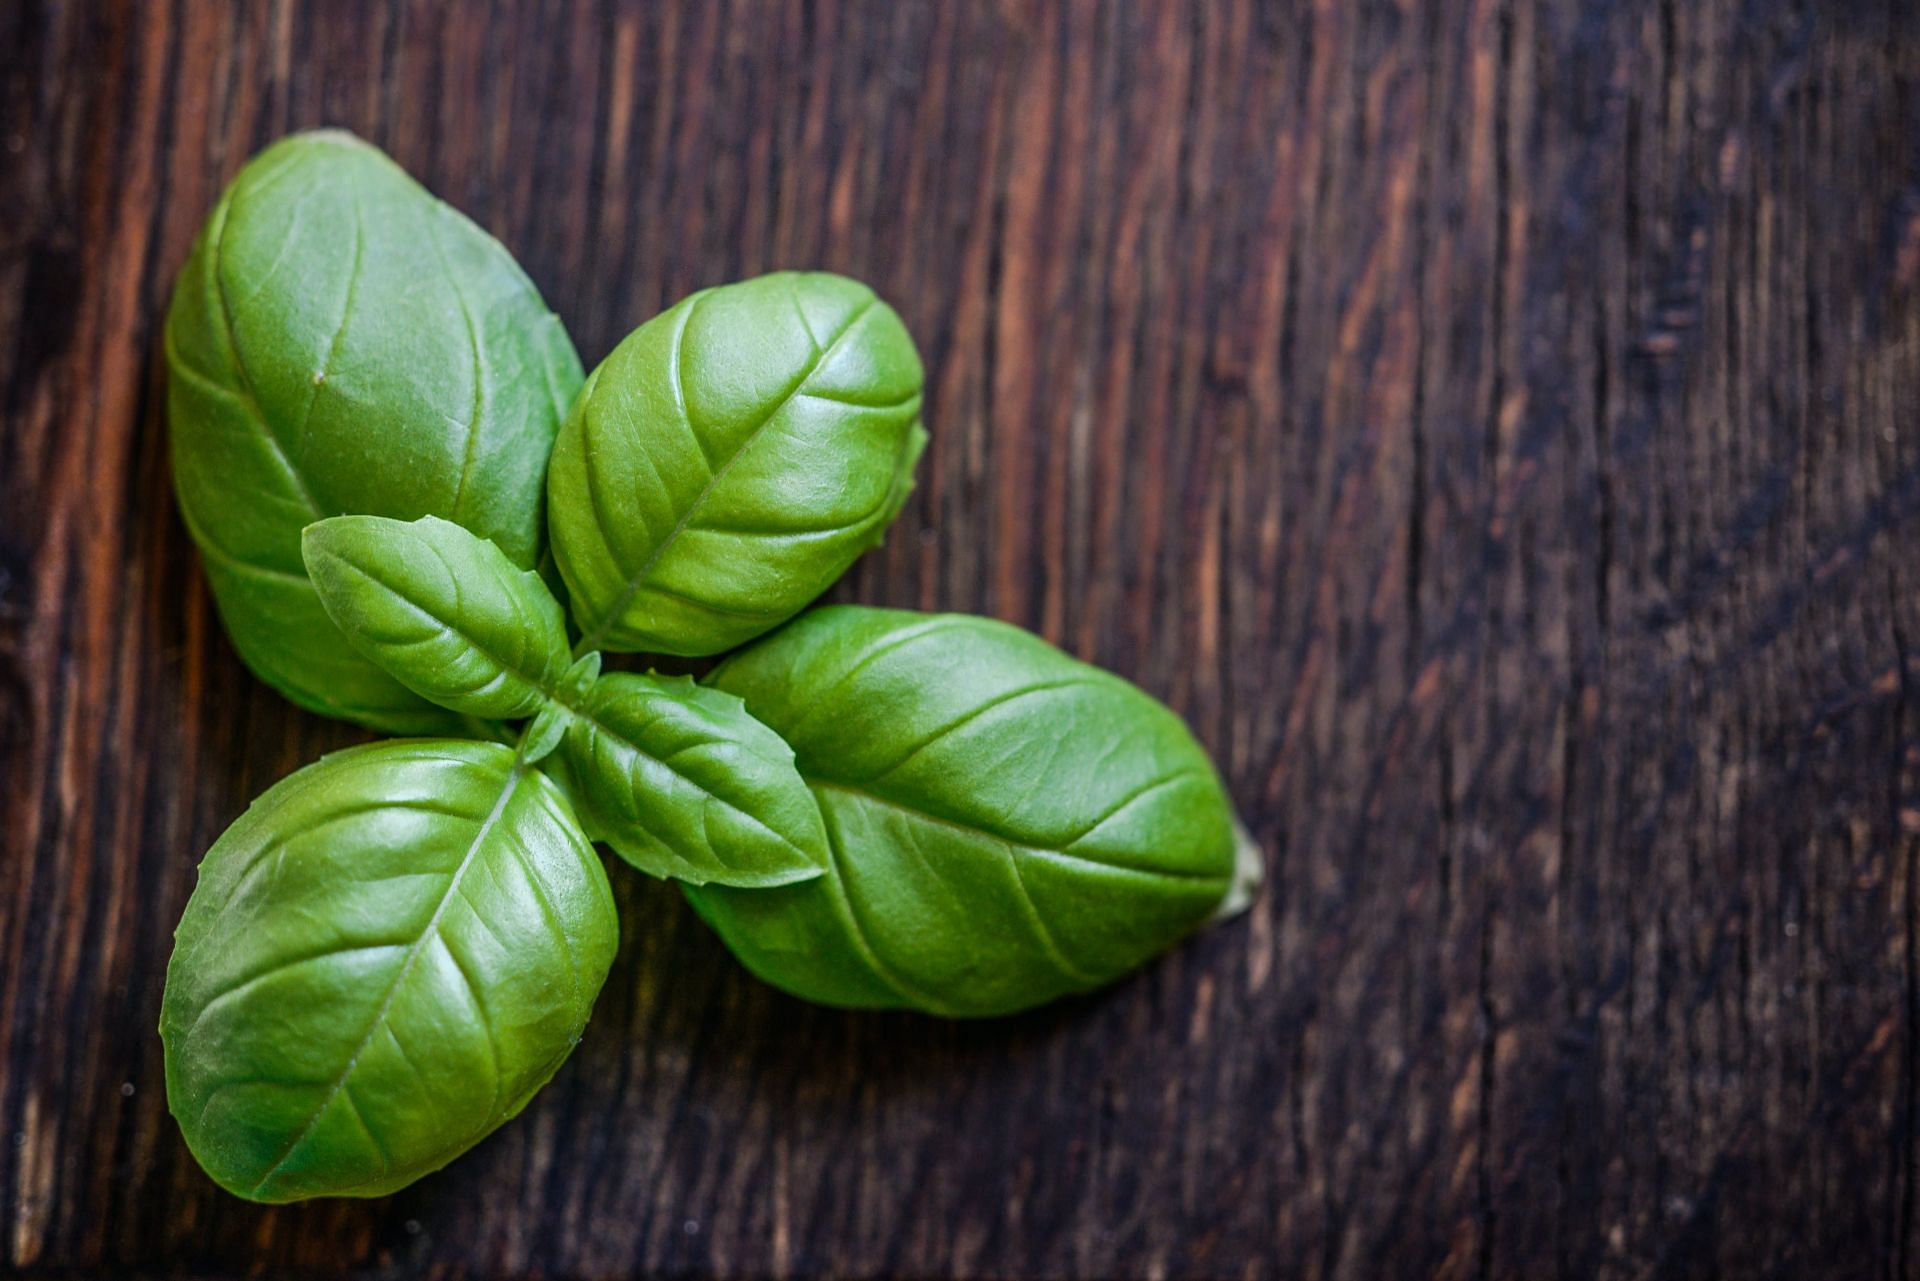 Benefits of using basil as herbs for energy (image sourced via Pexels / Photo by Monicore)